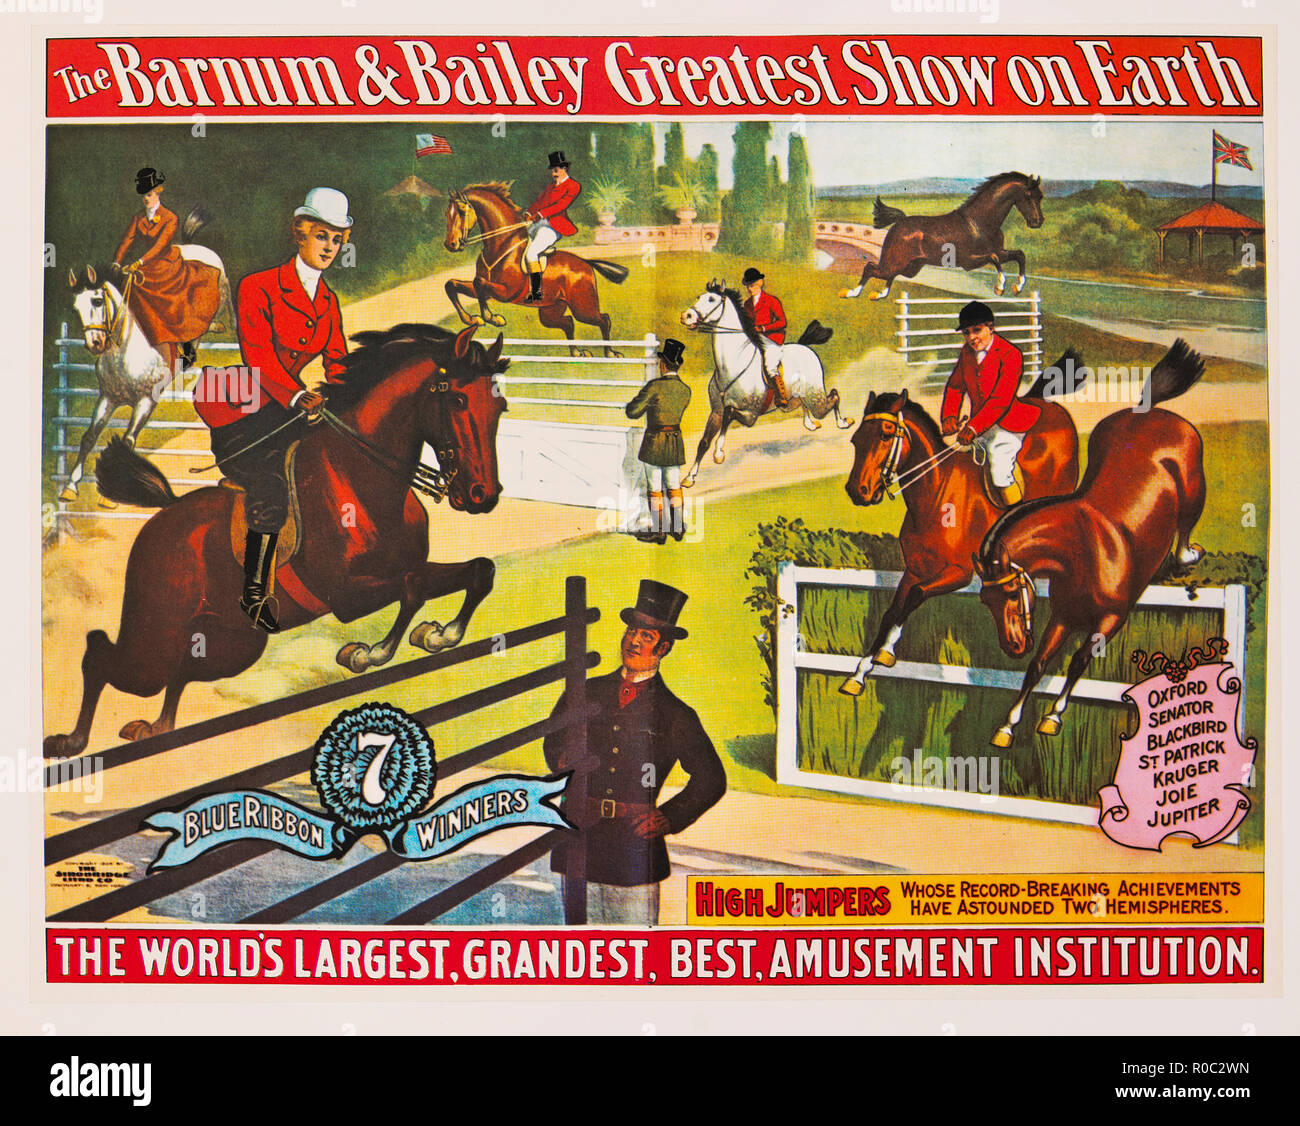 The Barnum & Bailey Greatest Show on Earth, 7 Blue Ribbon Winners, High Jumpers Whose Record-Breaking Achievements Have Astounded Two Hemispheres, Circus Poster, Lithograph, 1904 Stock Photo